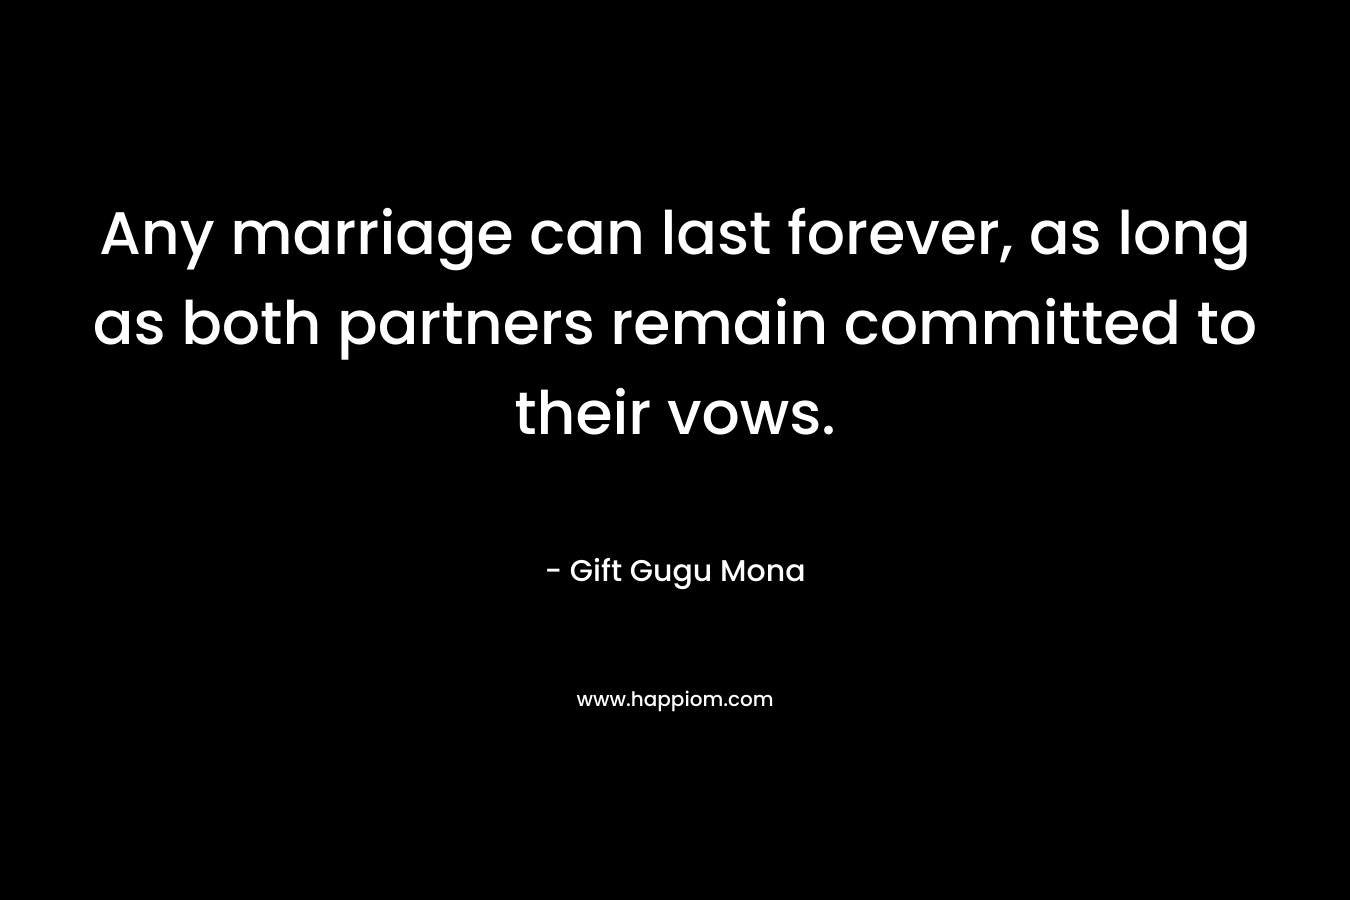 Any marriage can last forever, as long as both partners remain committed to their vows. – Gift Gugu Mona